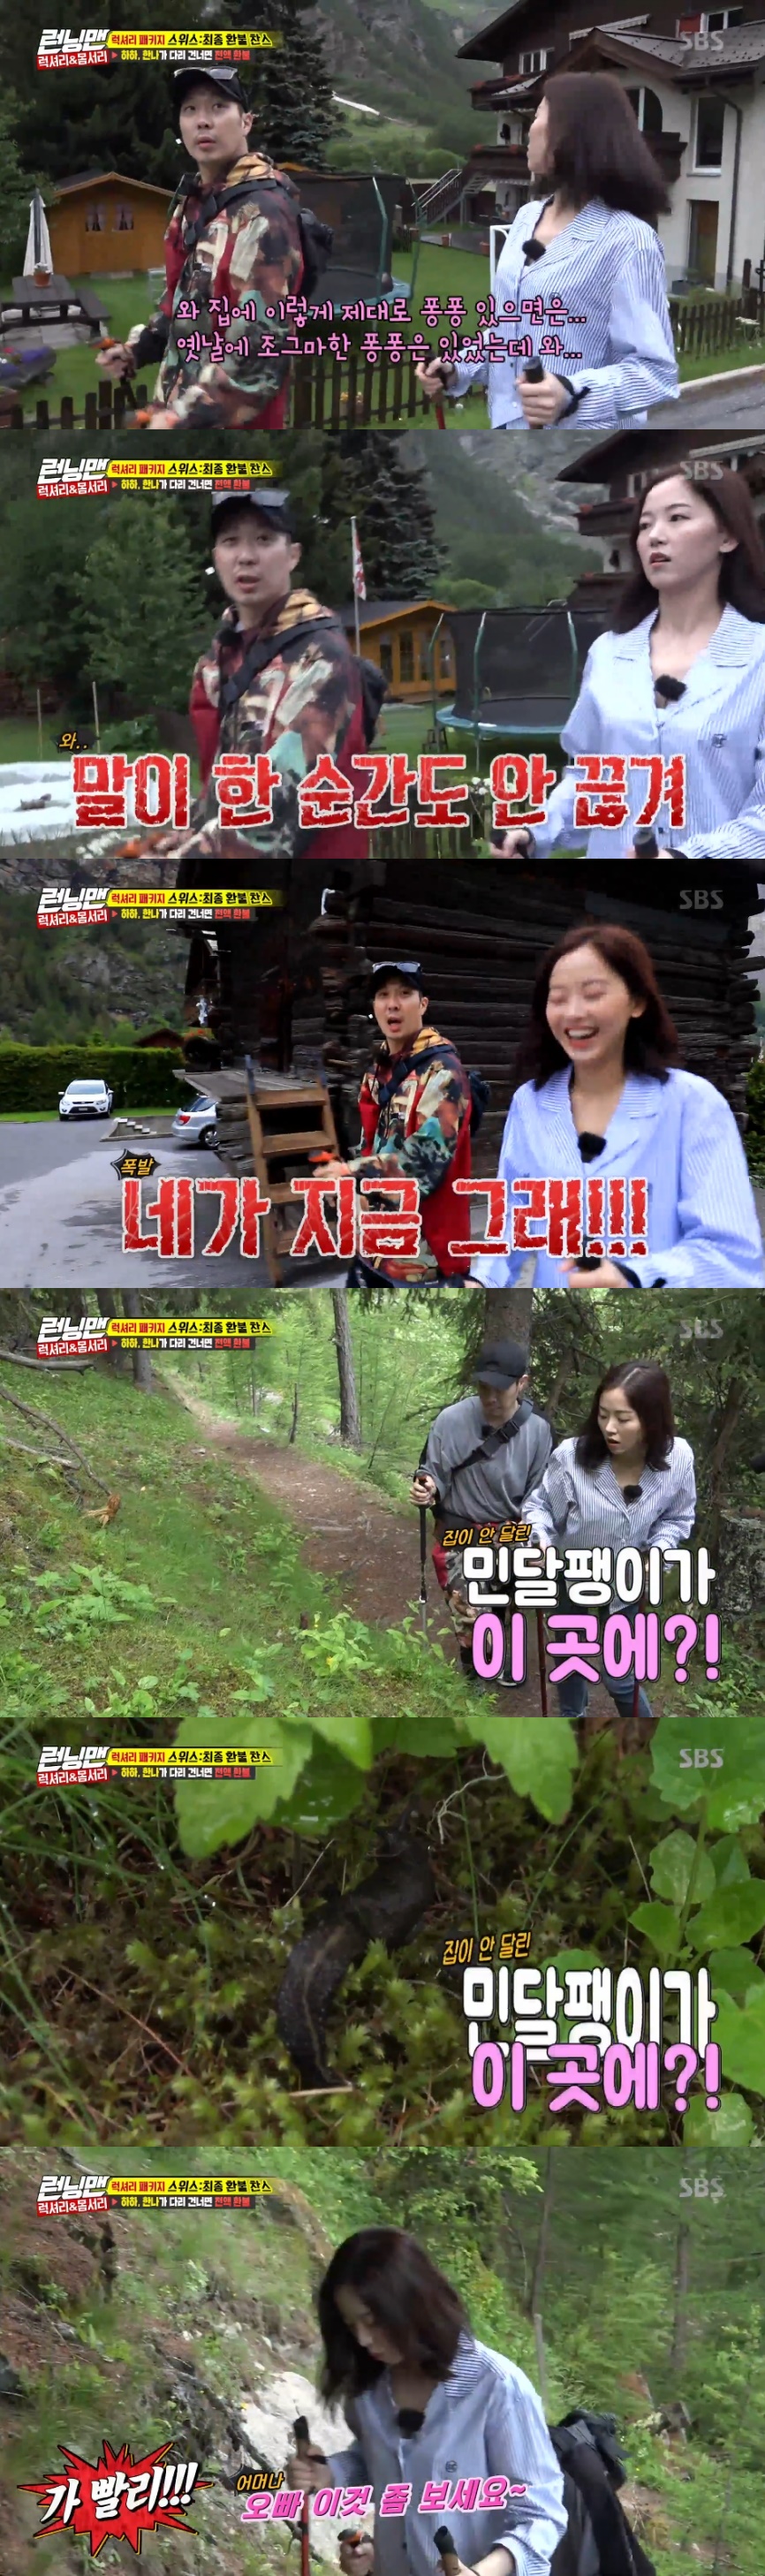 Actor Kang Han-Na laughed in the face of Two Murch Talkers (speakers) with no prudence that singer Haha also had both hands.On July 8th, SBS Running Man, Kang Han-Na went on a luxury package trip to Switzerland with actors Song Ji-hyo, singer Hong Jin-young, Kim Jong Kook, Haha and comedian Yang Se-chan.Members who challenged HeliPFC Levski Sofia in the last broadcast enjoyed the Michelin course dinner of Chalet Peak chief chef on the day.But for a moment, the crew announced that they should settle the cost of the Michelin course dinner with Heli PFC Levski Sofia.The members were nervous about the big settlement. The settlement decision was the last settlement roulette.Haha, who won the first roulette, was paid 900,000 won for the Heli PFC Levski Sofia. Michelin course dinner was 250,000 won per person.In order to pay for six people, a total of 1.5 million won was required. The main character of the bad luck was in Hahas hands.As Haha turned the final roulette, Roulettes arrow pointed to Kang Han-Na, who had a look of disloyalty, wrapping his head in both hands.At the same time, a final refund was also given.The crew promised to refund the full payment fee when they experience one of the three sets of Switzerland body courses for the members who wrote the Xavi.However, Limb was the only possible activity because of the unexpected Switzerland weather.Charles Cuonen Limb is the worlds longest Limb, a bridge 494 meters long and 85 meters high across the Alps.The production team said that if two of the six cross the bridge, they will refund all members money.The main character of the final roulette was Kang Han-Na as Kang Han-Na hoped.Kang Han-Na told Haha, I will build up my last good memories in Switzerland with my best coward Haha brother.Ill take the last jump shot at Limb, said Haha, who was frustrated; leaving the accommodation at 6am the next day, I actually wanted the storm to come today.I prayed hard for the first time sincerely. The two arrived at Landa Station where the trail started and started to Limb.However, unlike expectations, the two men who went on a mountain climbing enjoyed a luxury package comparable to the luxury package.The other superb view, the clear air that can only be seen during the Switzerland hike, Haha said, This is really how much air, its air that you can not buy even if you pay.I really did a lot of grudges by Kang Han-Na until I came, but thank you very much, Haha said, afterward, appreciating the minister and saying, I feel so upset.Later, the two admired, I got chicken meat at the same time, it was so pretty.Among them, Kang Han-Na was constantly chatting and laughing at Haha, who said, (I) have a lot of talk.I went to Hong Kong with my sister (former) Somin, and she kept saying it without really resting, Kang Han-Na said.You really are, Haha said.hwang hye-jin